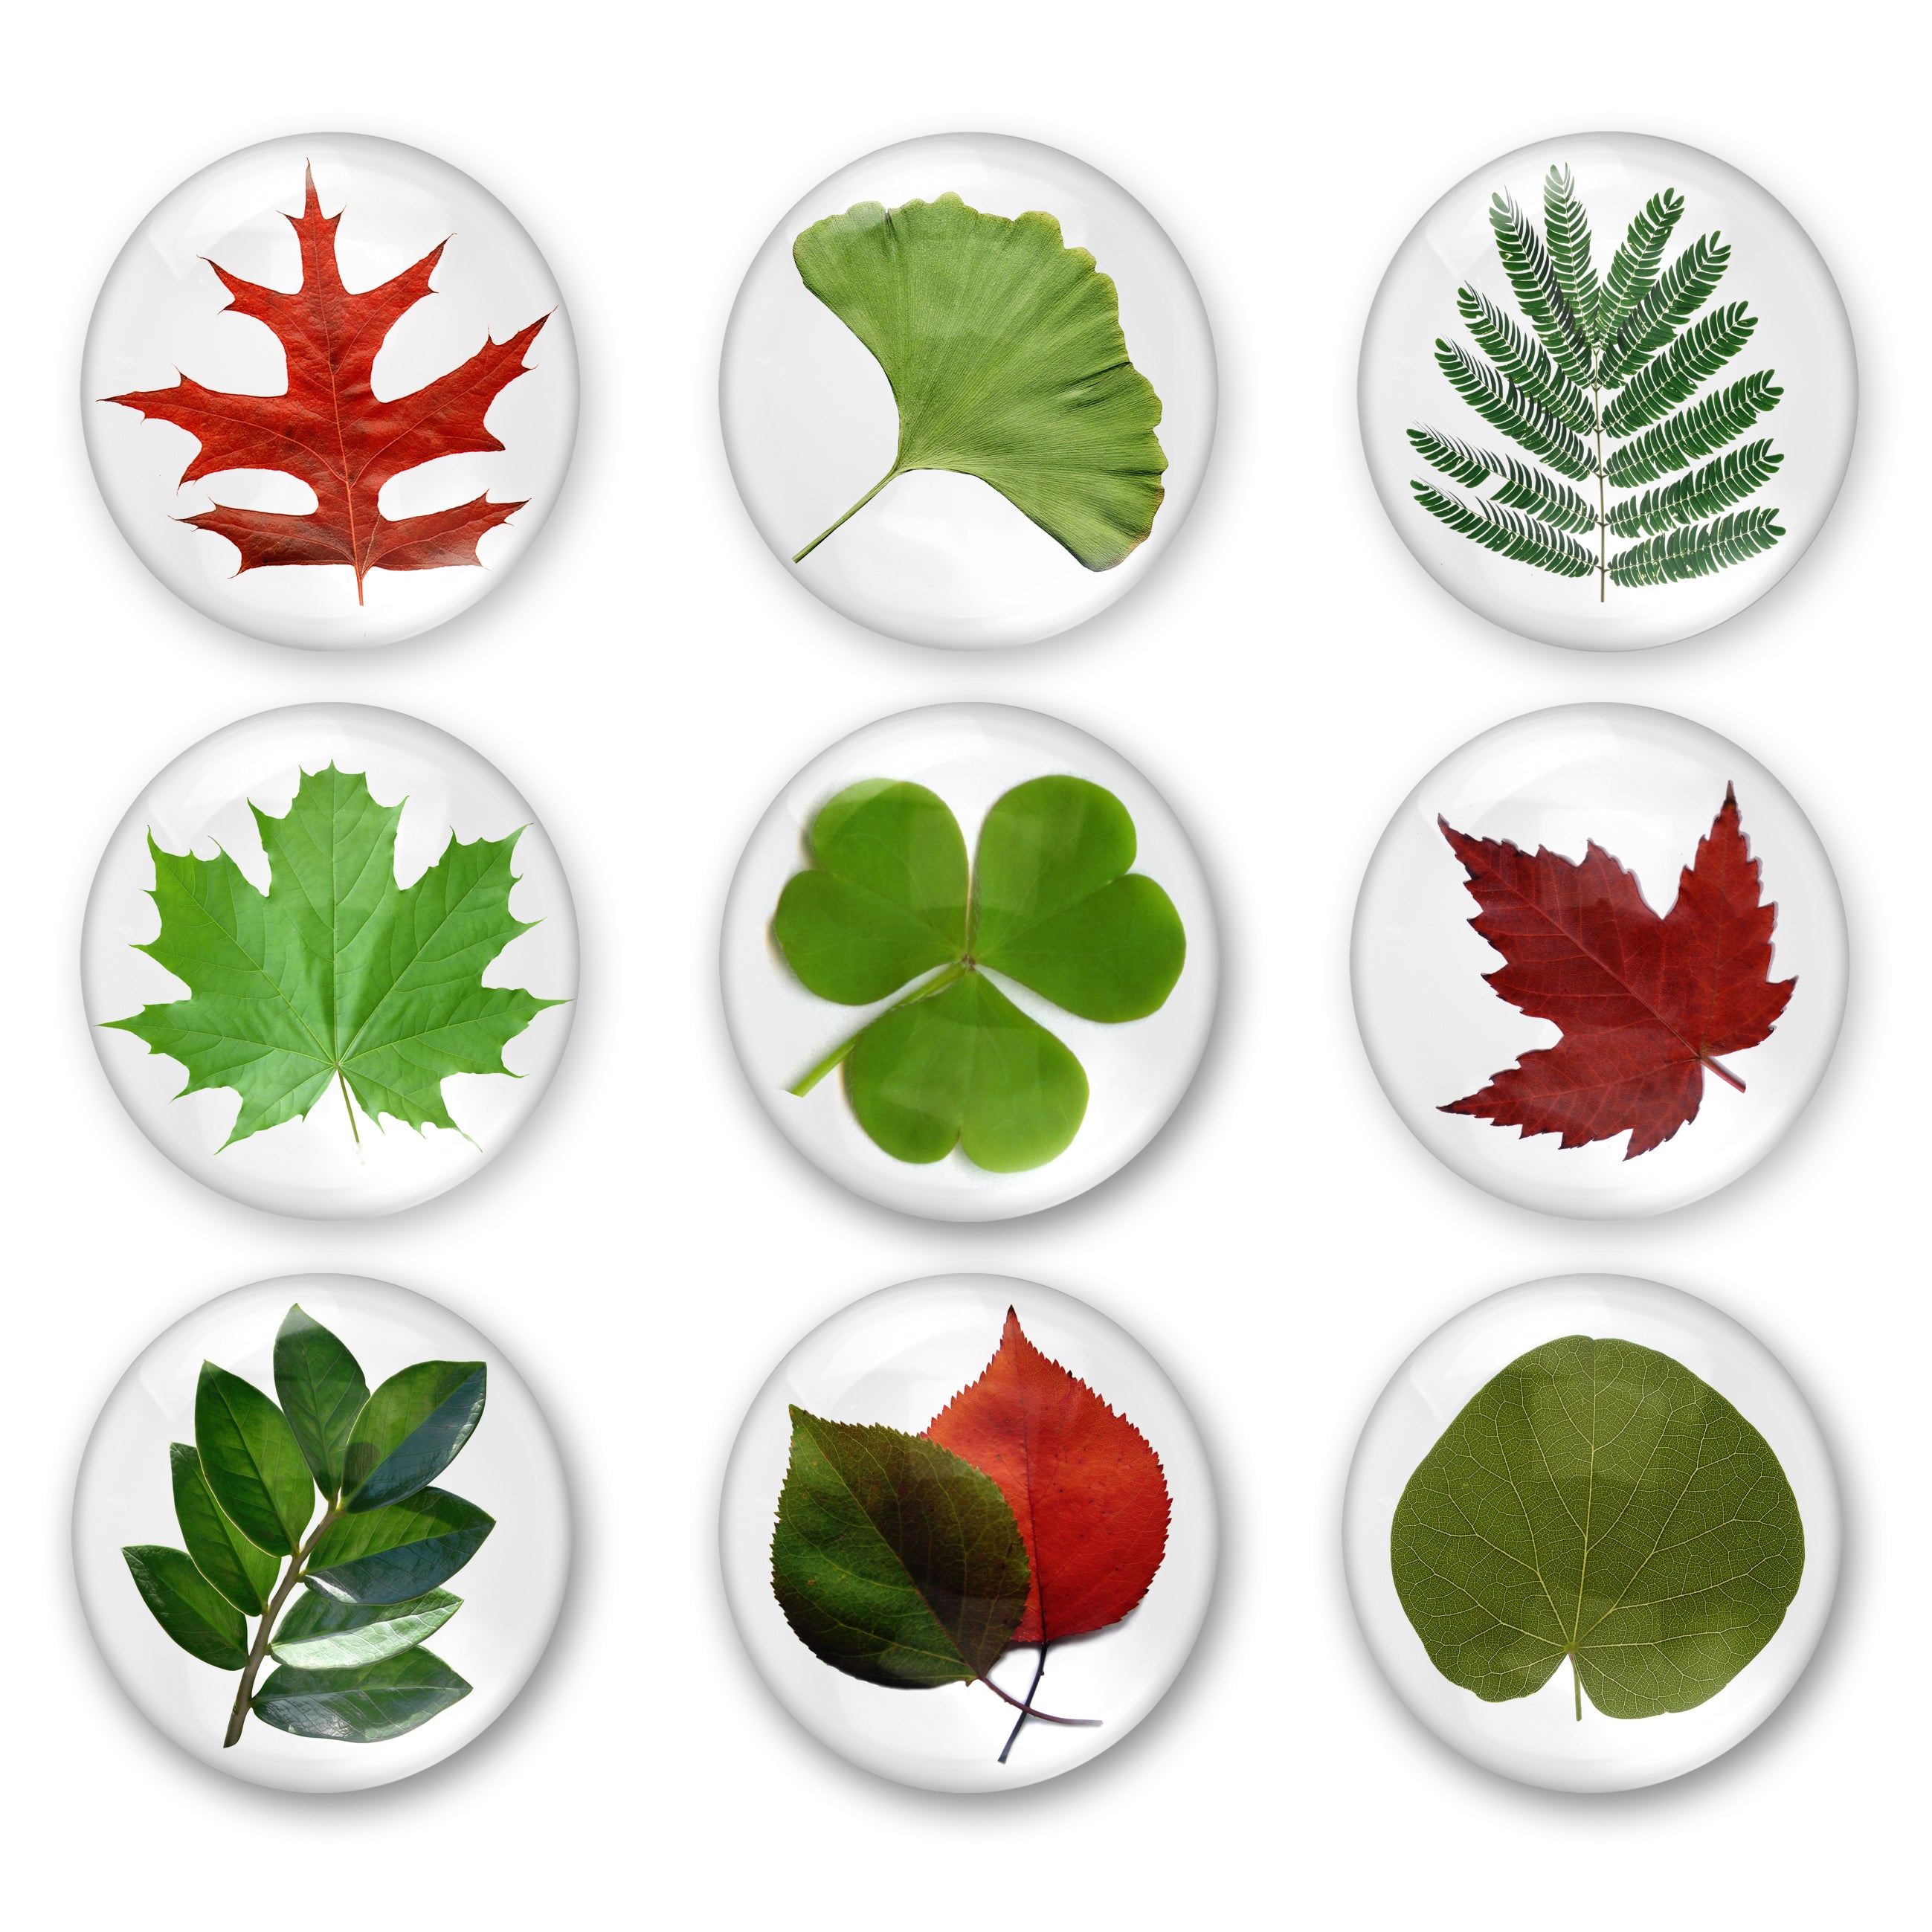 Cabochon Collage Sheet - Leaves - Printable round image in 7 sizes